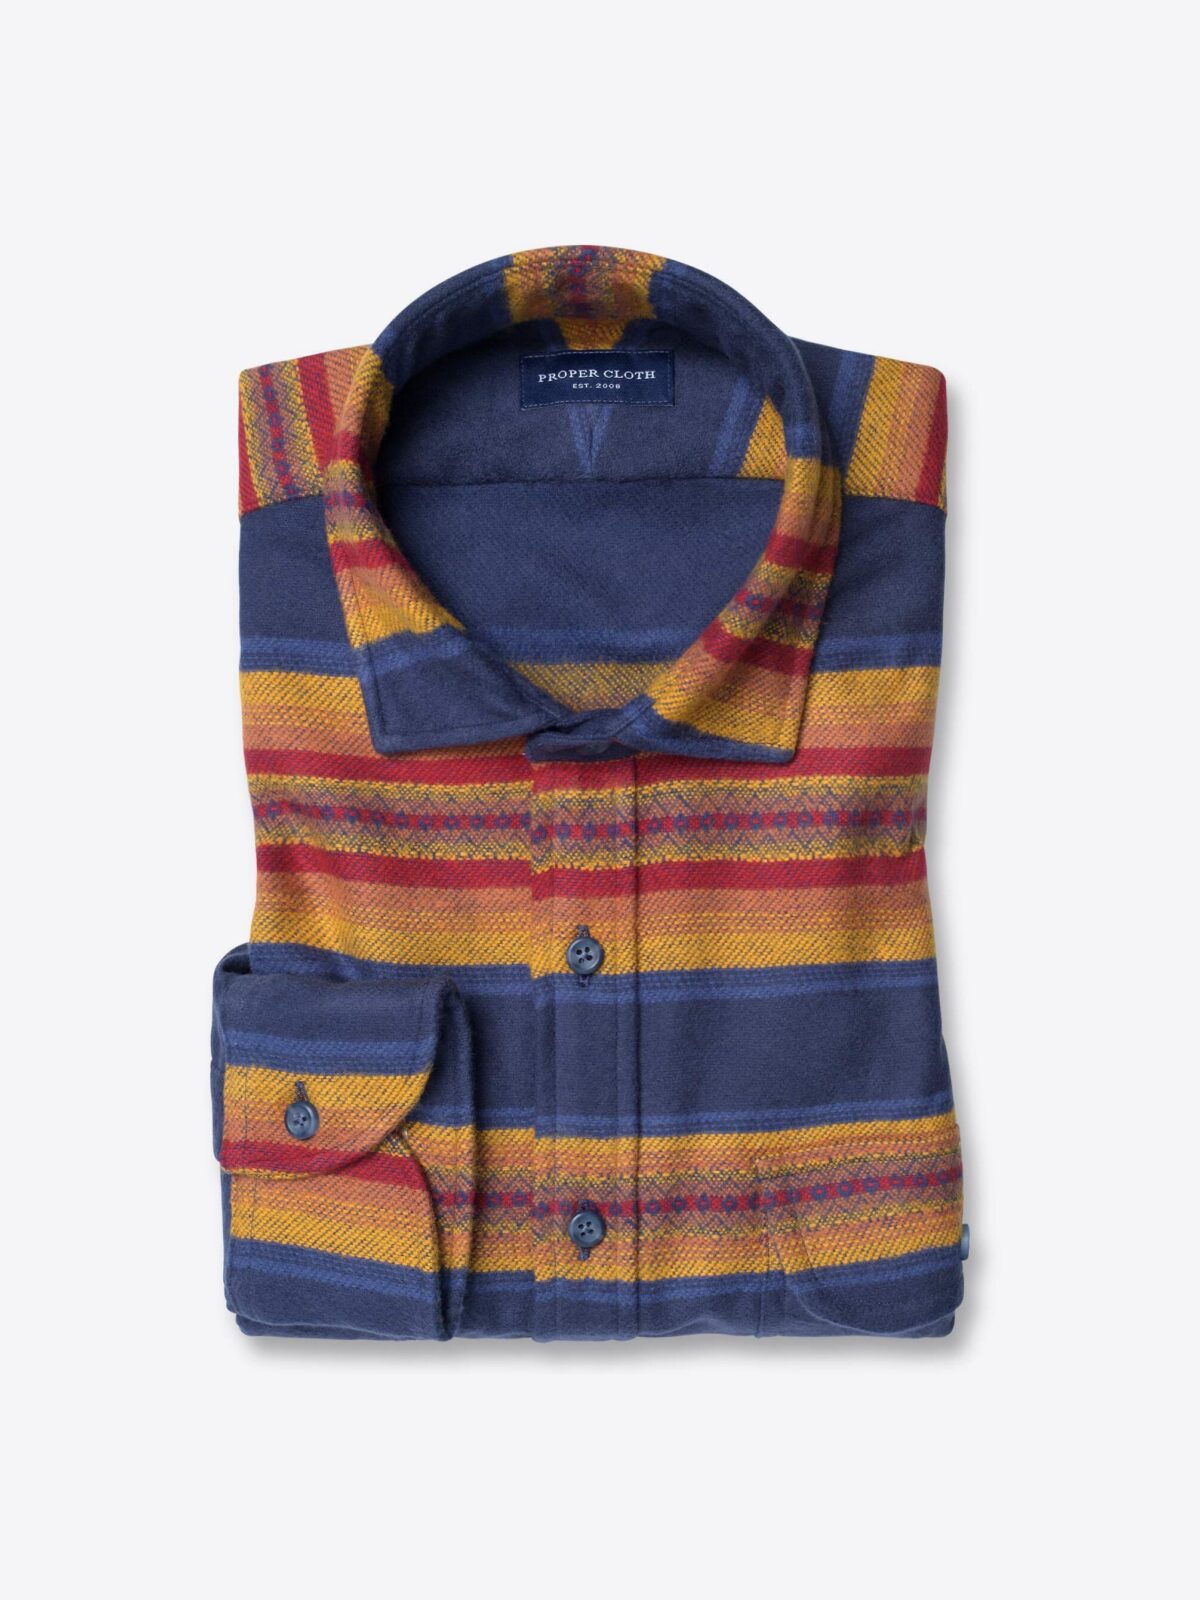 Navy and Sunset Southwest Blanket Stripe Shirt by Proper Cloth